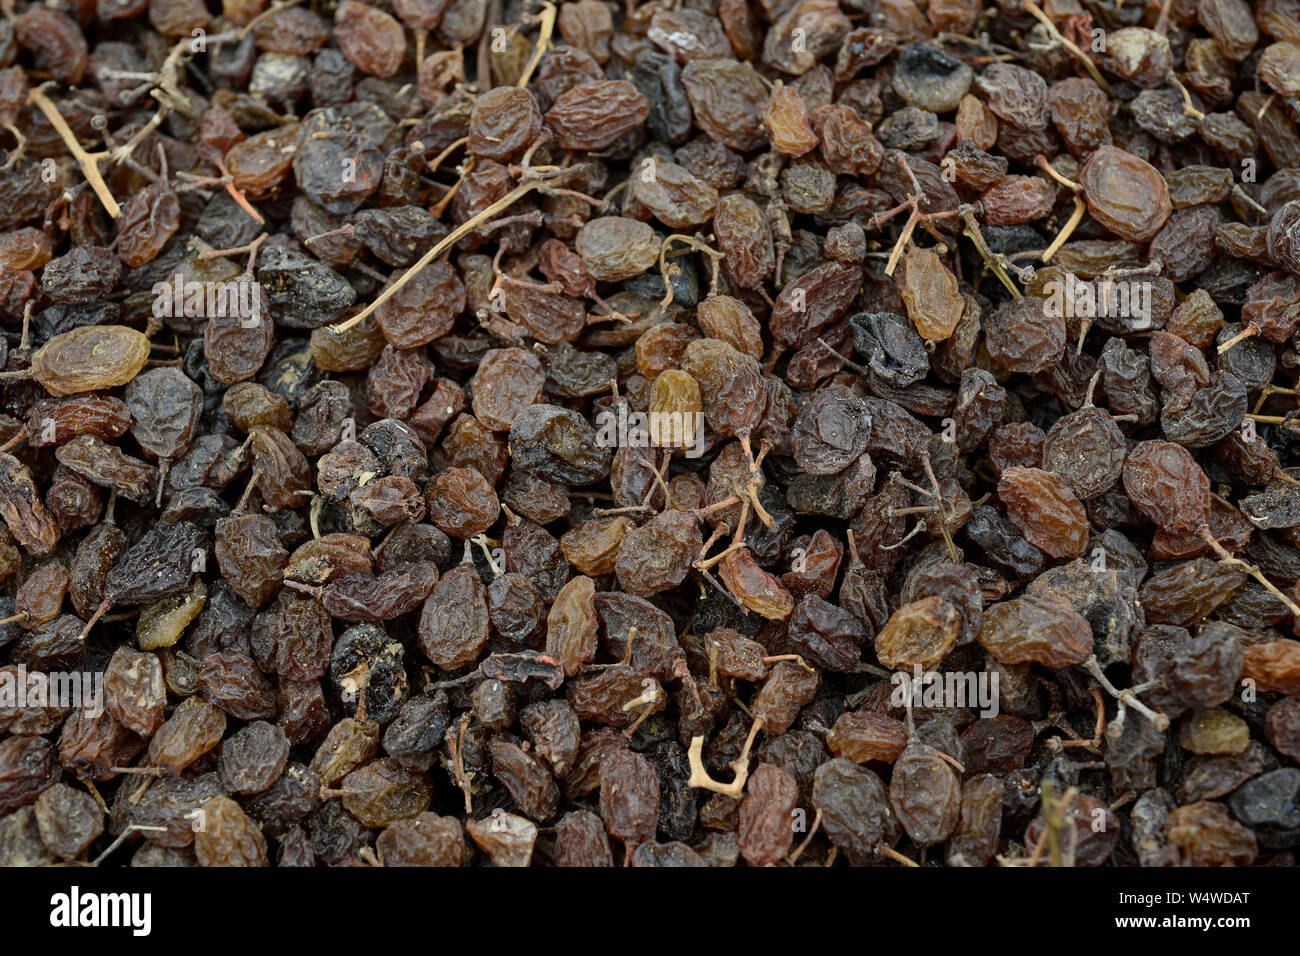 TURKEY Manisa, cultivation of grapes for production of raisin and sultana,  sun dried grapes at farm /